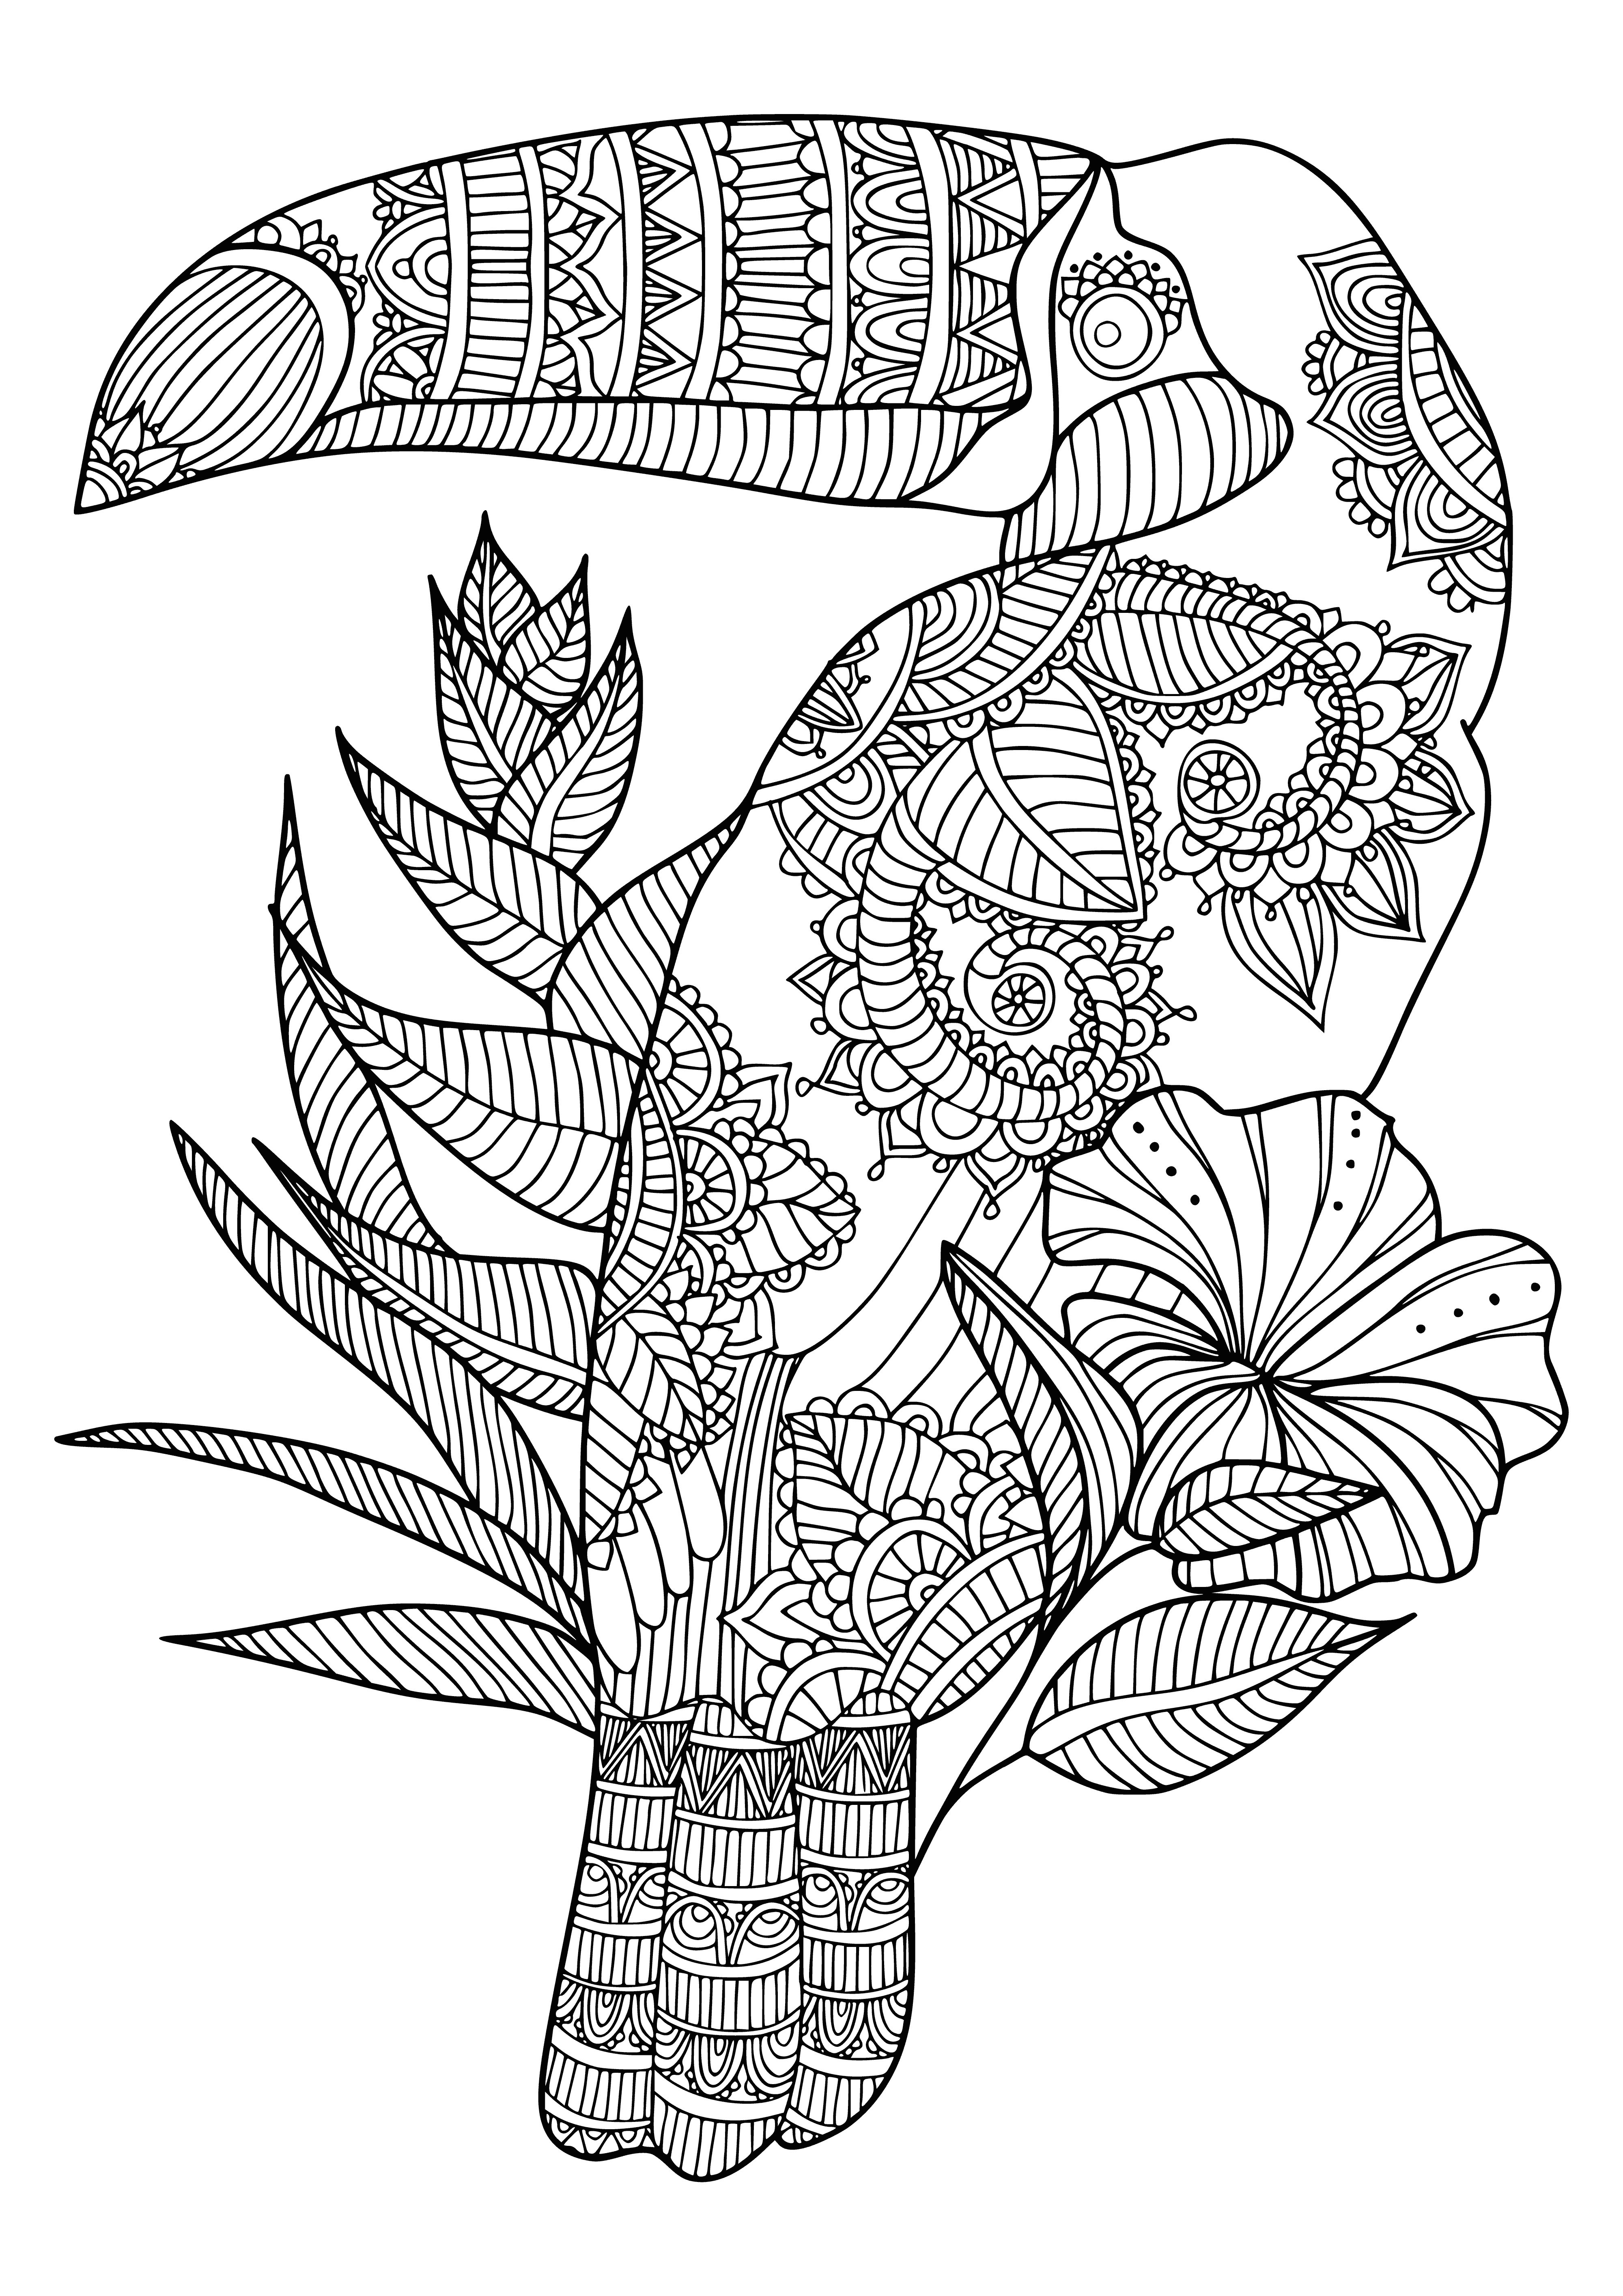 coloring page: A toucan with a yellow beak and body and black wings and stripes perched on a gradient of blues and greens.